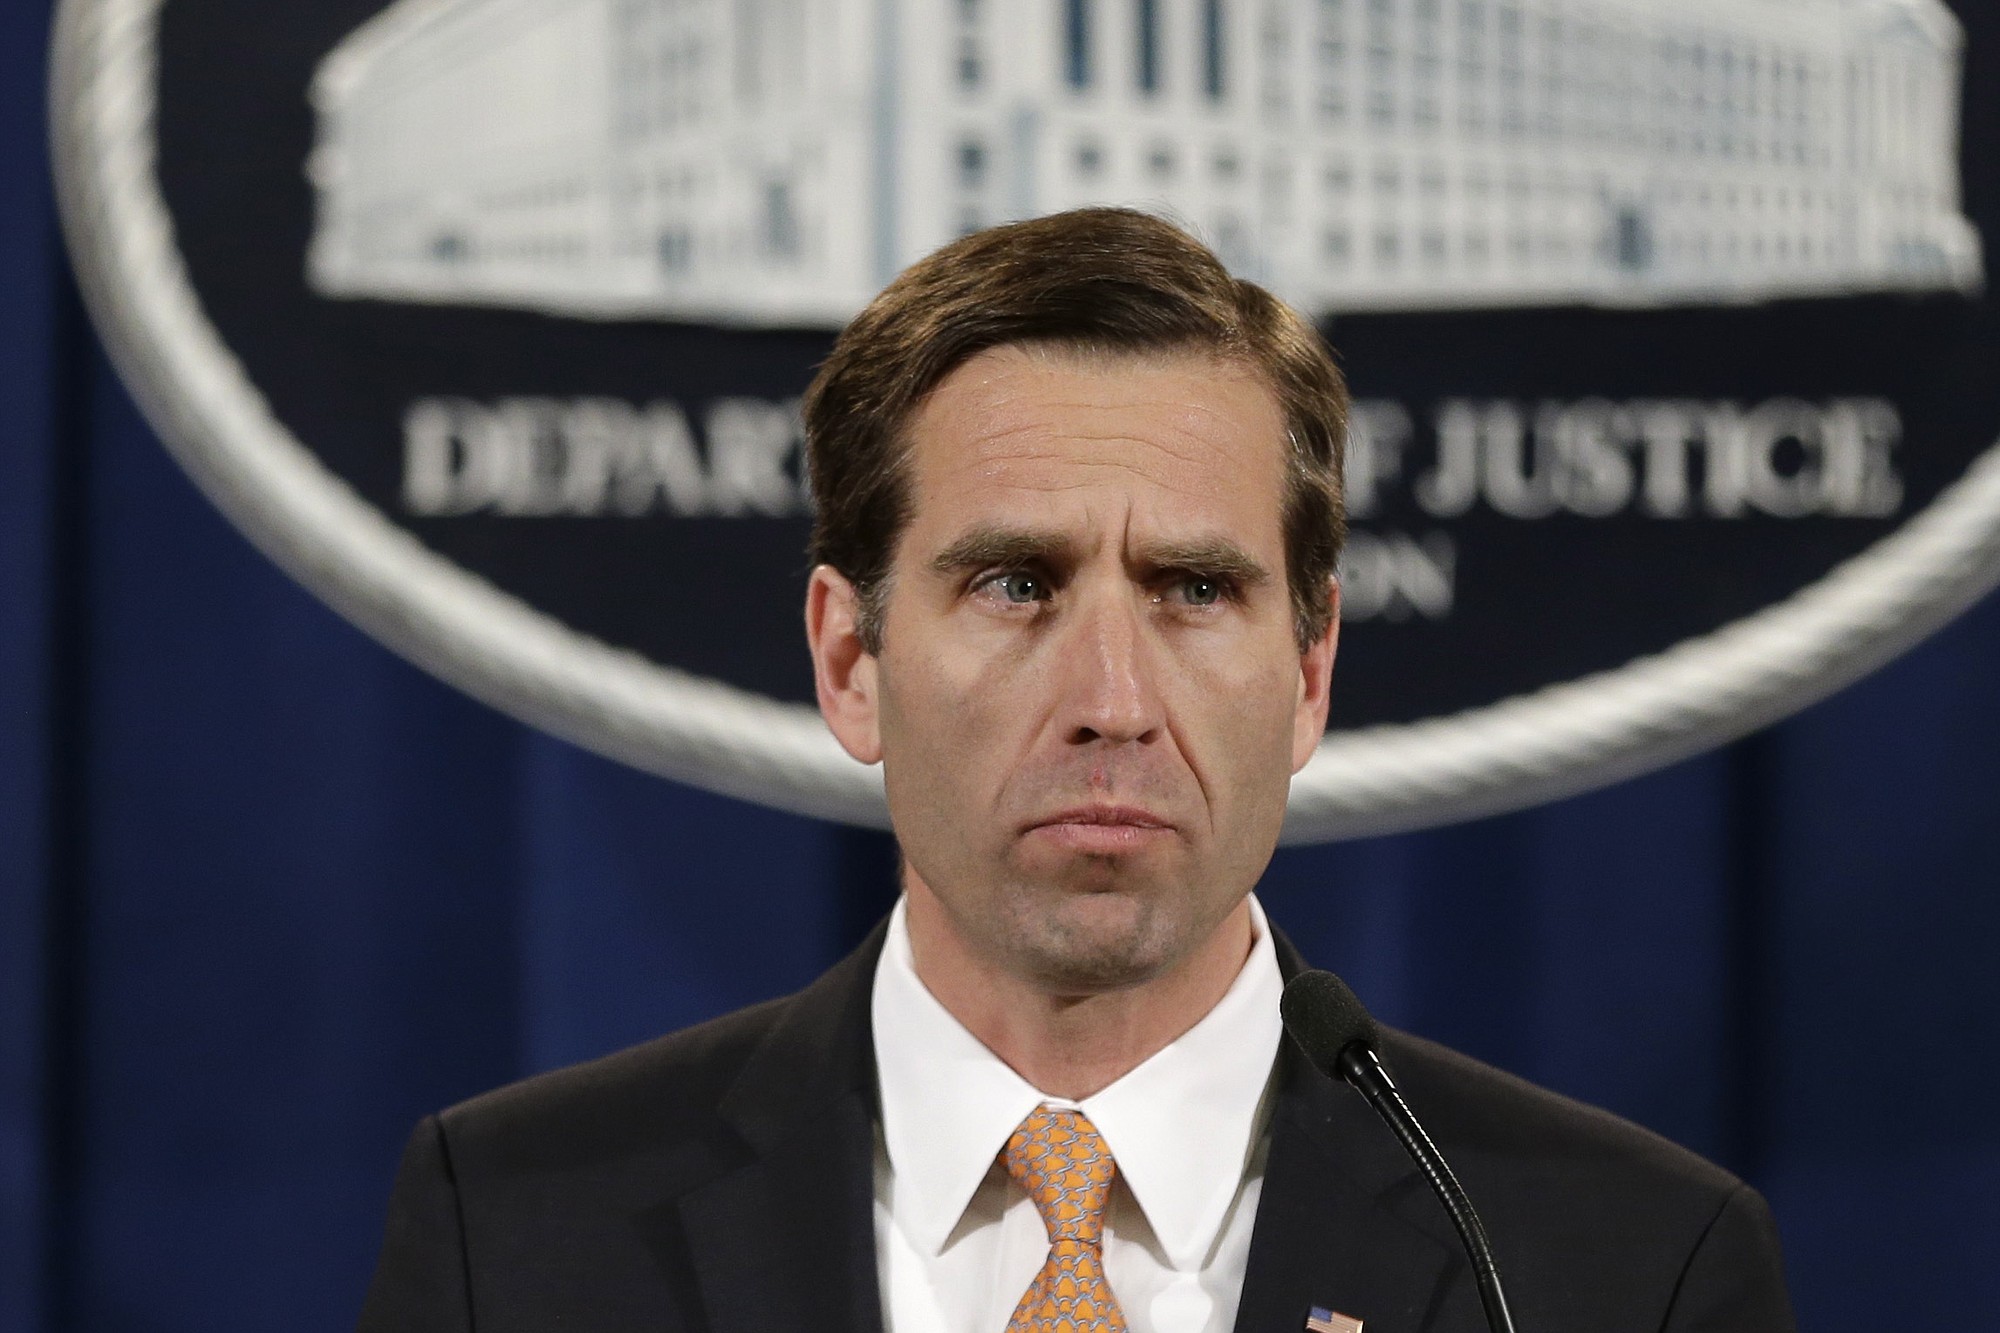 Delaware Attorney General Beau Biden pauses while speaking at a February 2013 news conference at the Justice Department in Washington.